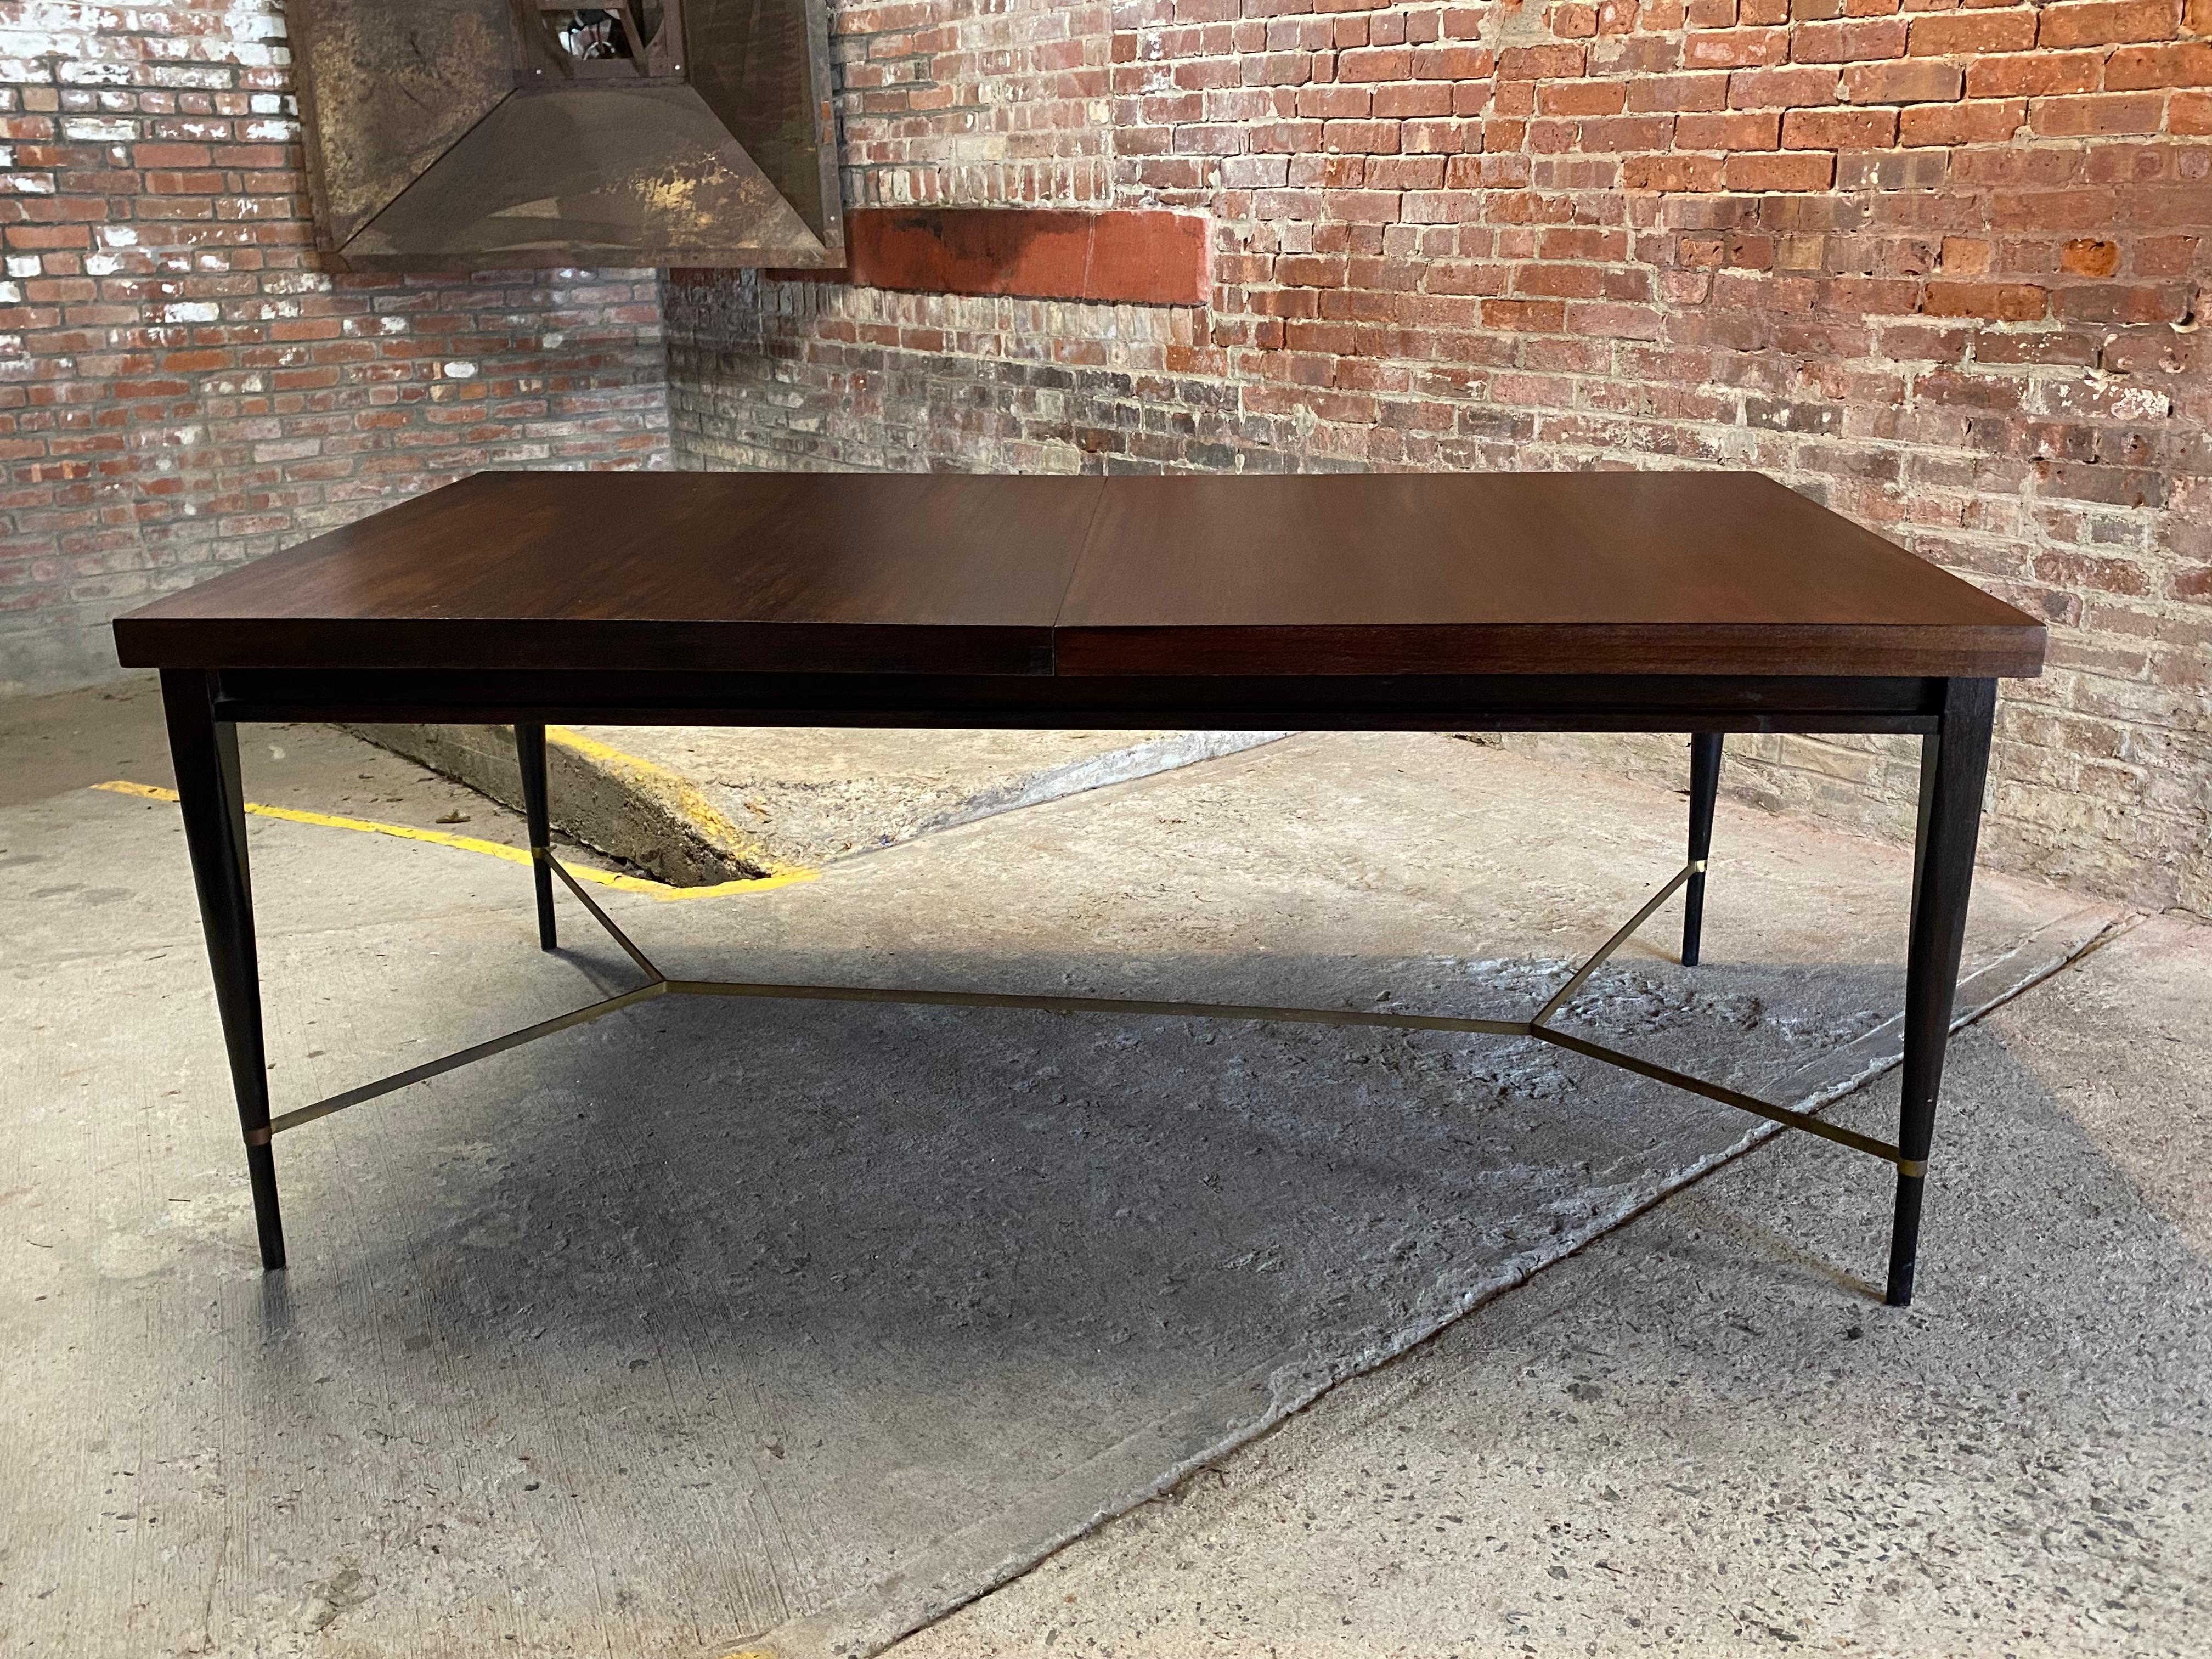 Mahogany and Brass dining table with leaves designed by Paul McCobb for Calvin. Signed with brass plate on the table top runners, Calvin, Grand Rapids, The Irwin Collection, Designed by Paul McCobb. Circa 1950-60. The table comes with two leaves;